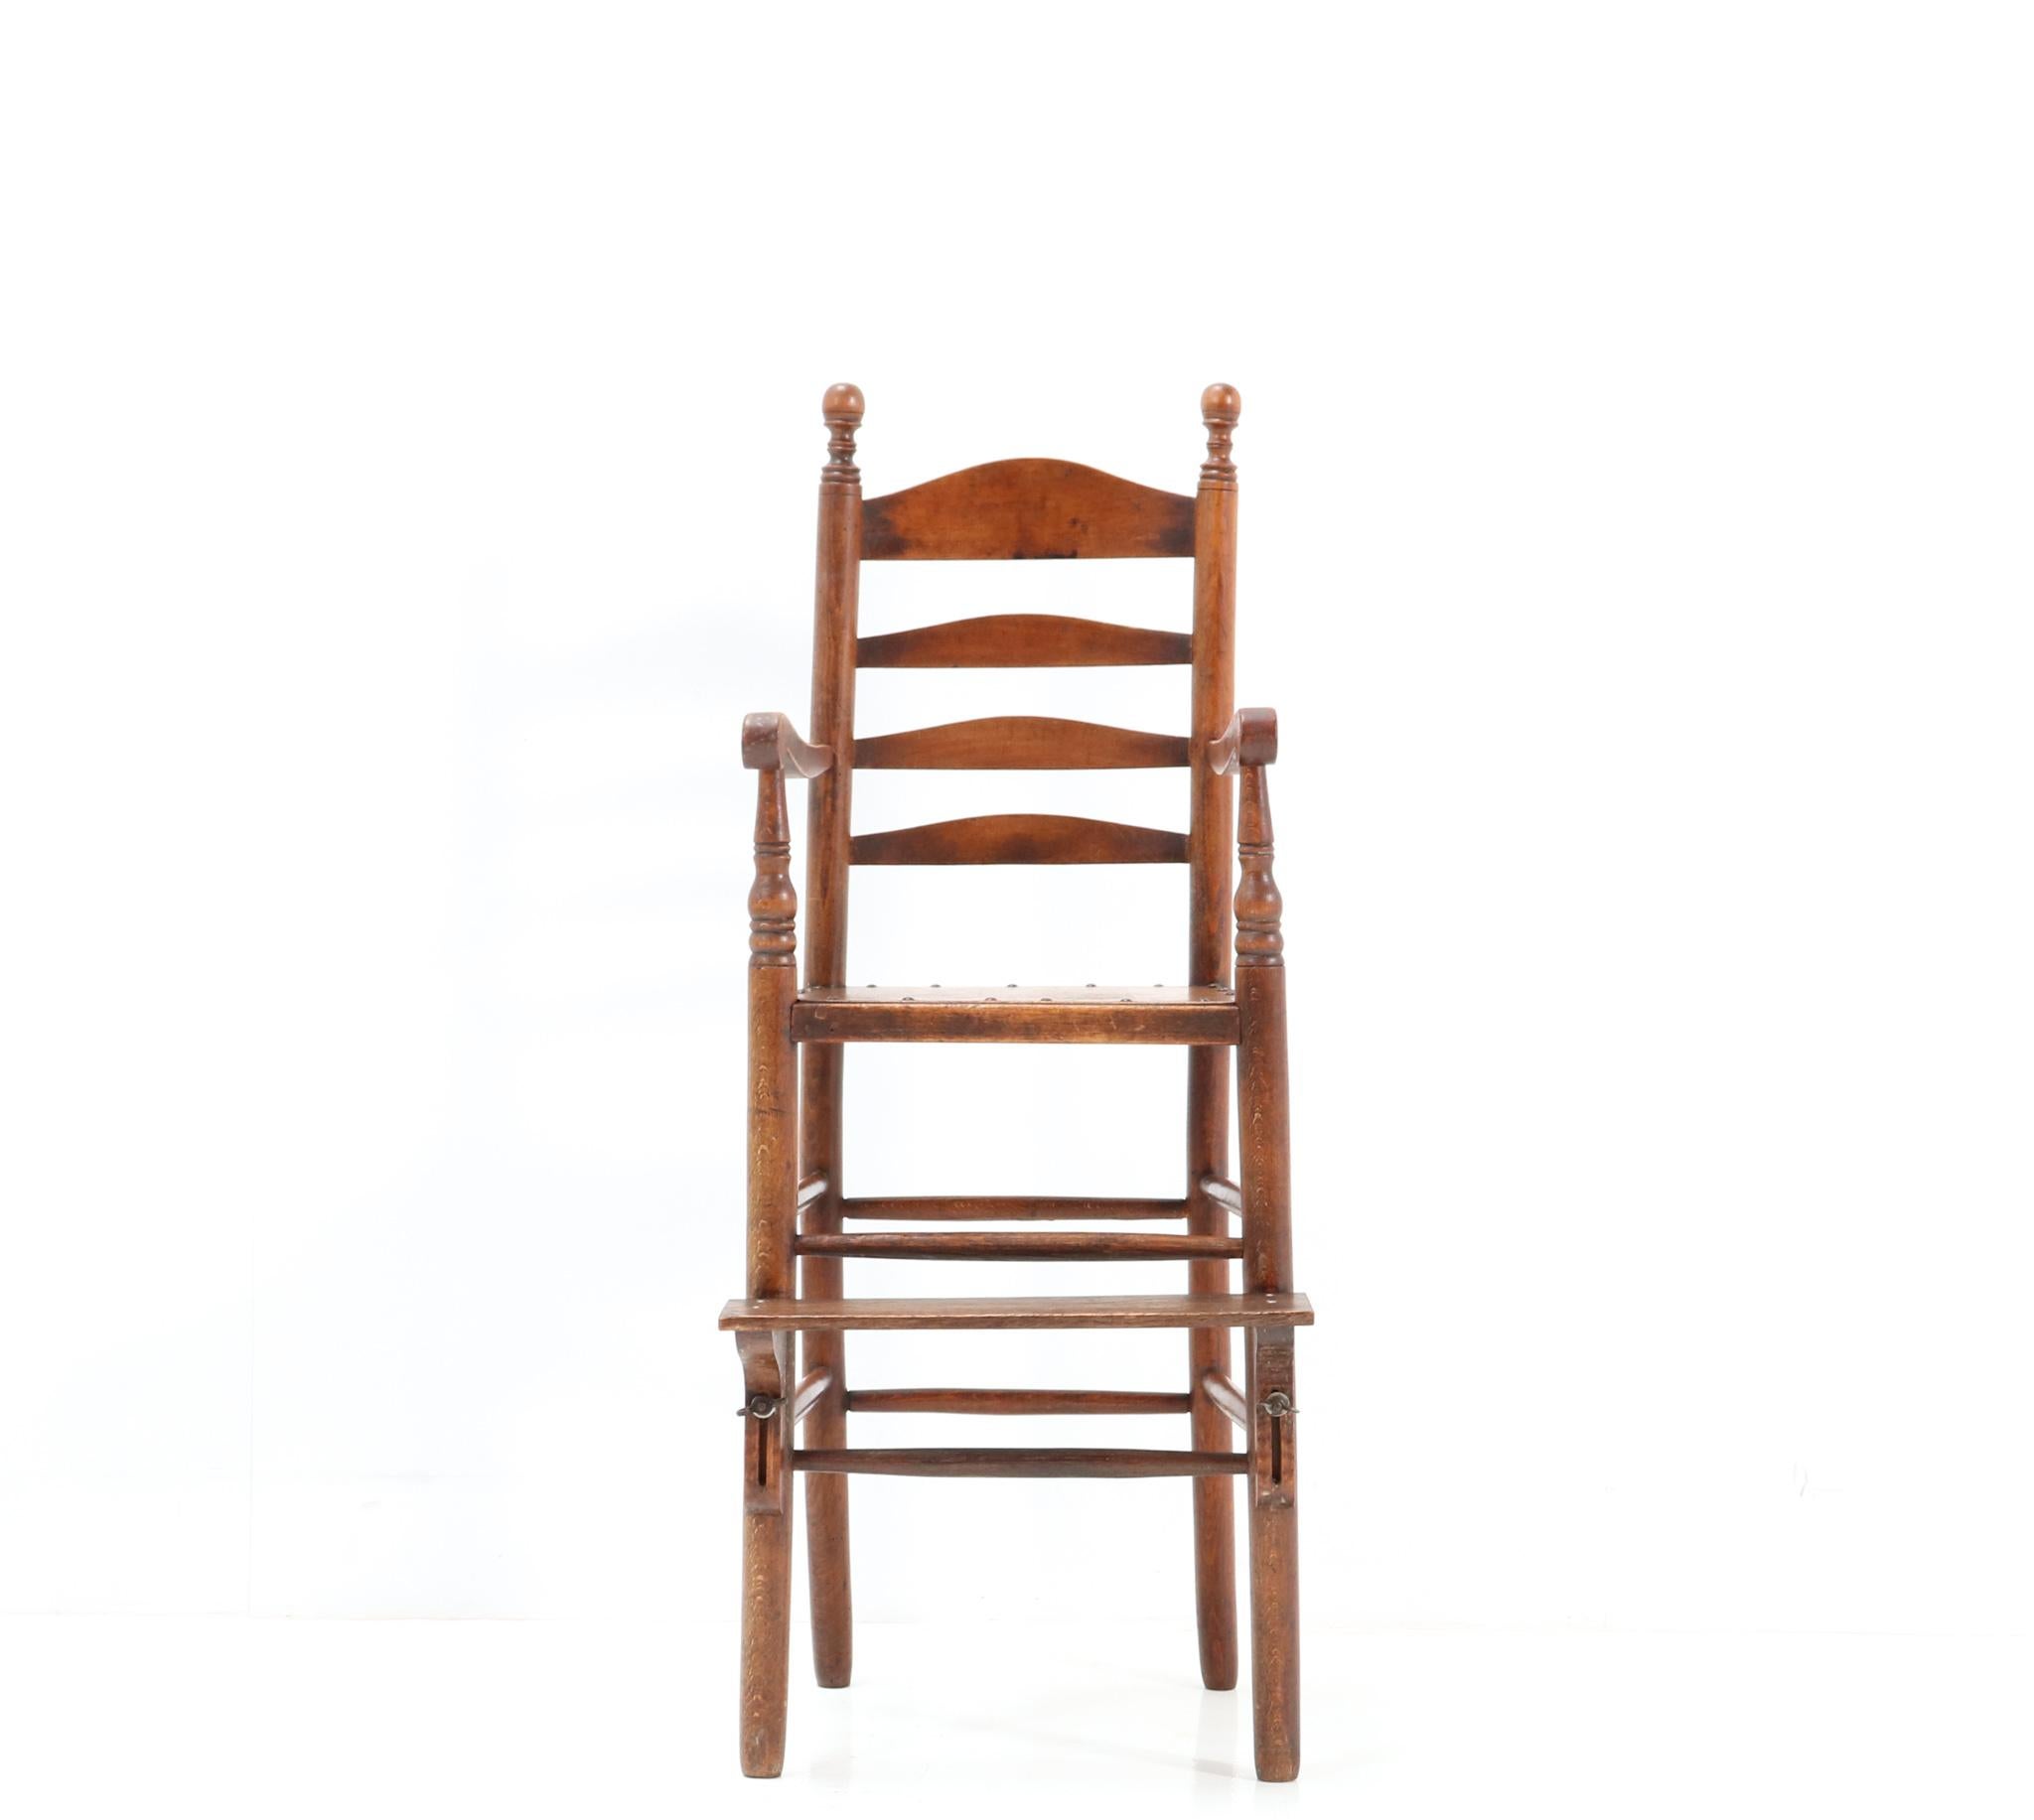 Stunning and rare Antique Country children's ladder back chair.
Striking Dutch design from the 1890s.
Solid beech frame with original adjustable feet support.
This wonderful Antique Country children's ladder back chair is in
very good condition